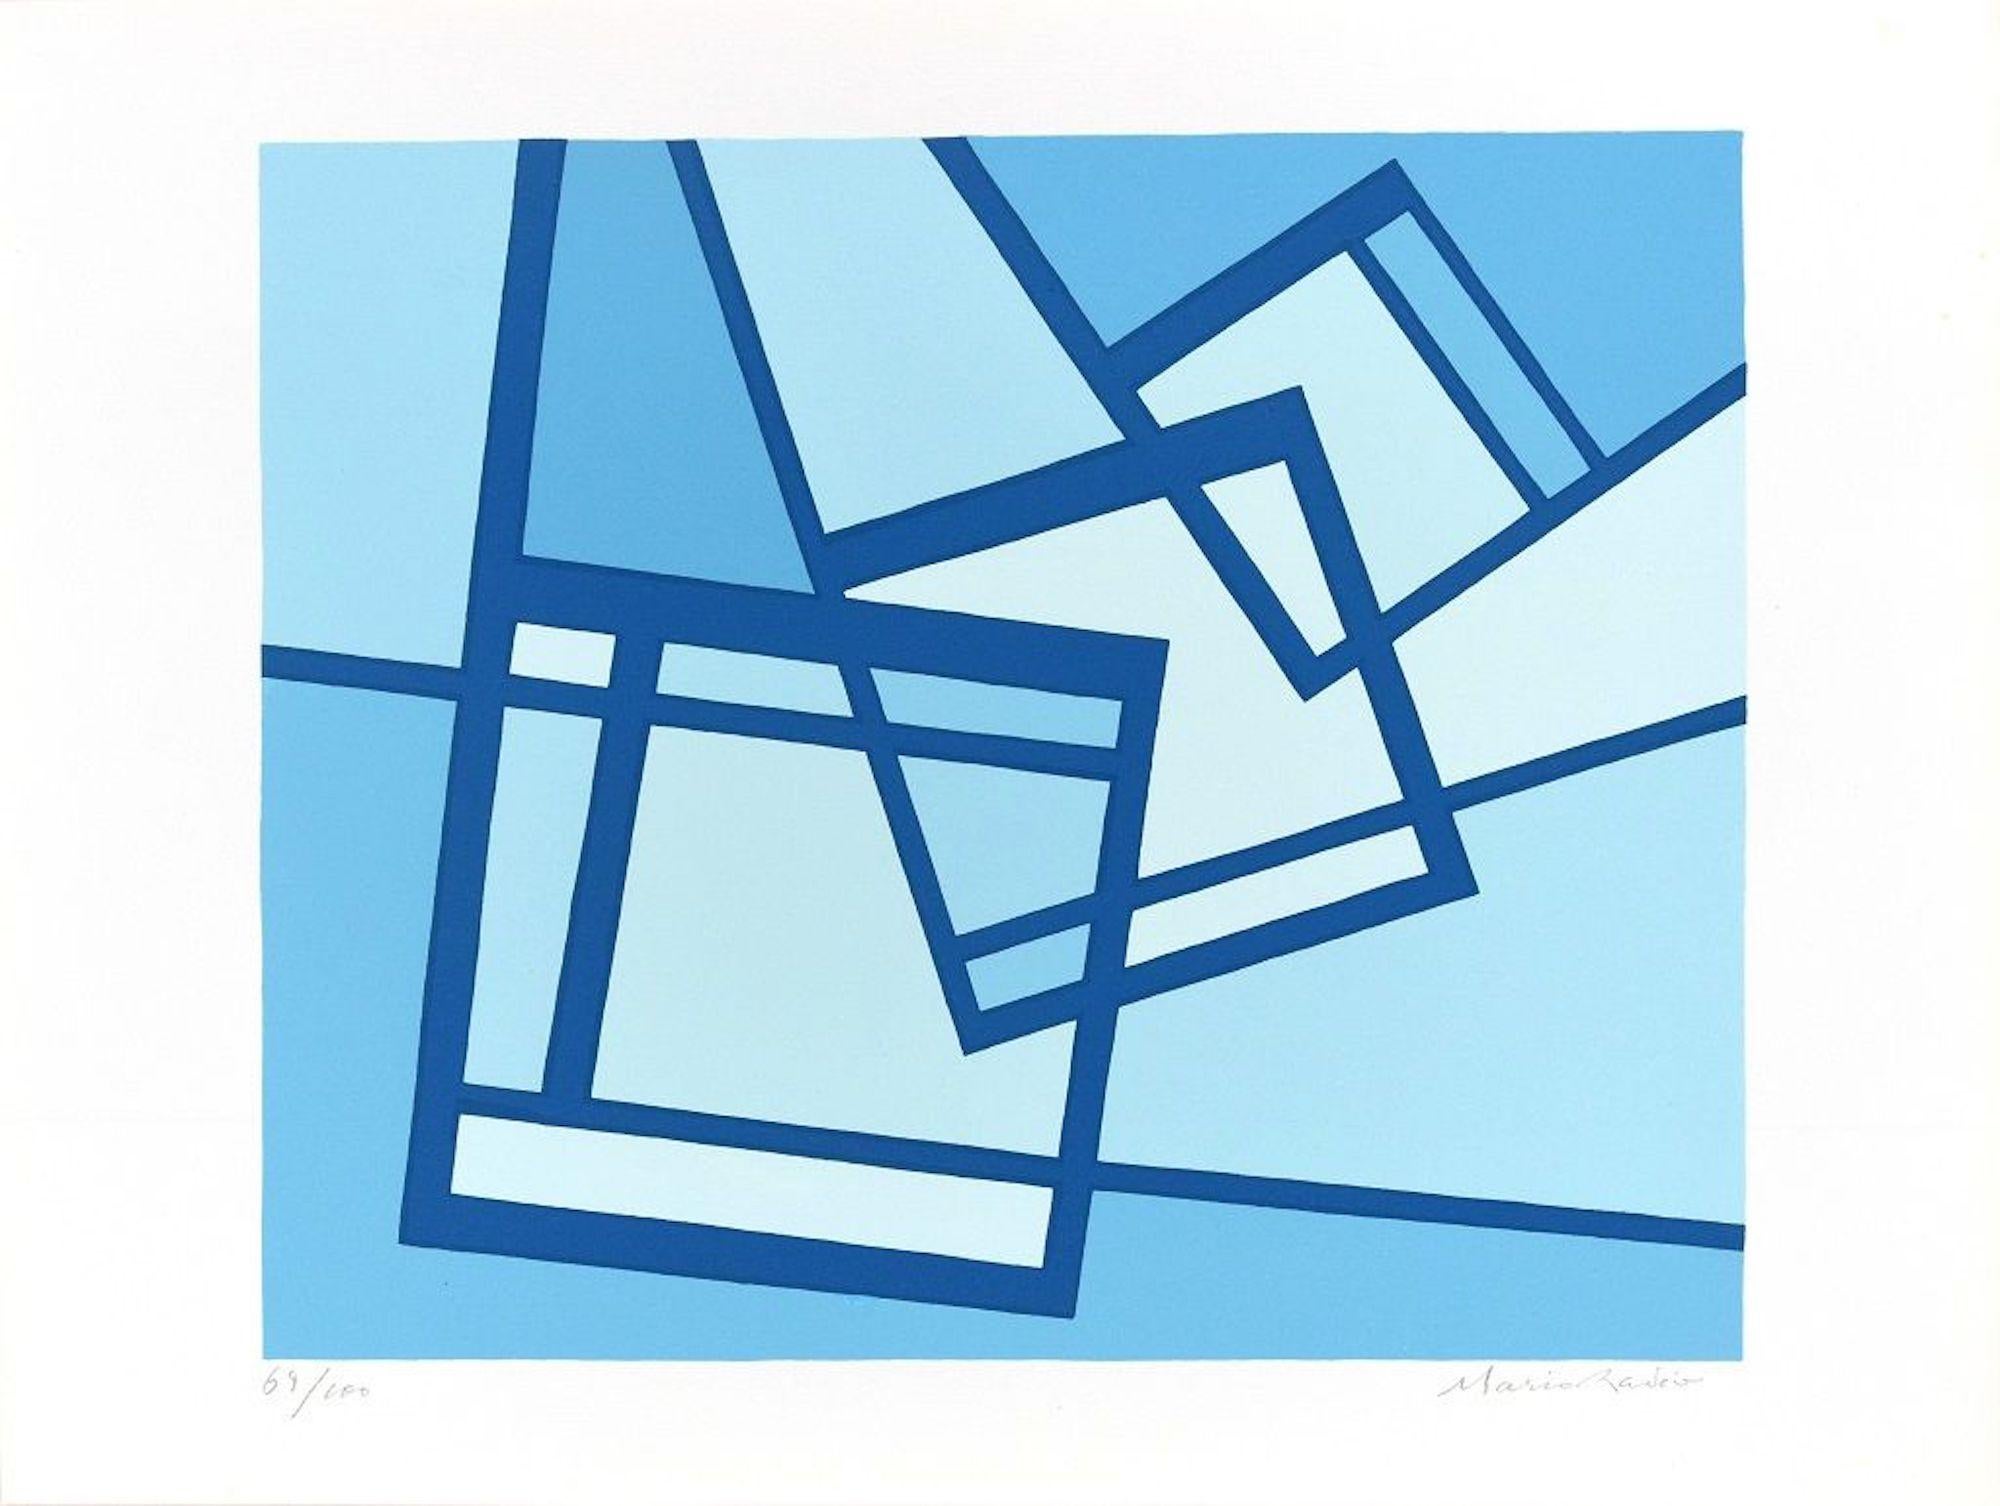 Image dimensions: 26.8 x 32.3 cm.

Donne Dannate is a beautiful original colored serigraph on paper, realized by the Italian artist and one of the pioneer of the Abstract art, Mario Radice (1898-1987) and published in 1964 by La Nuova Foglio.

This